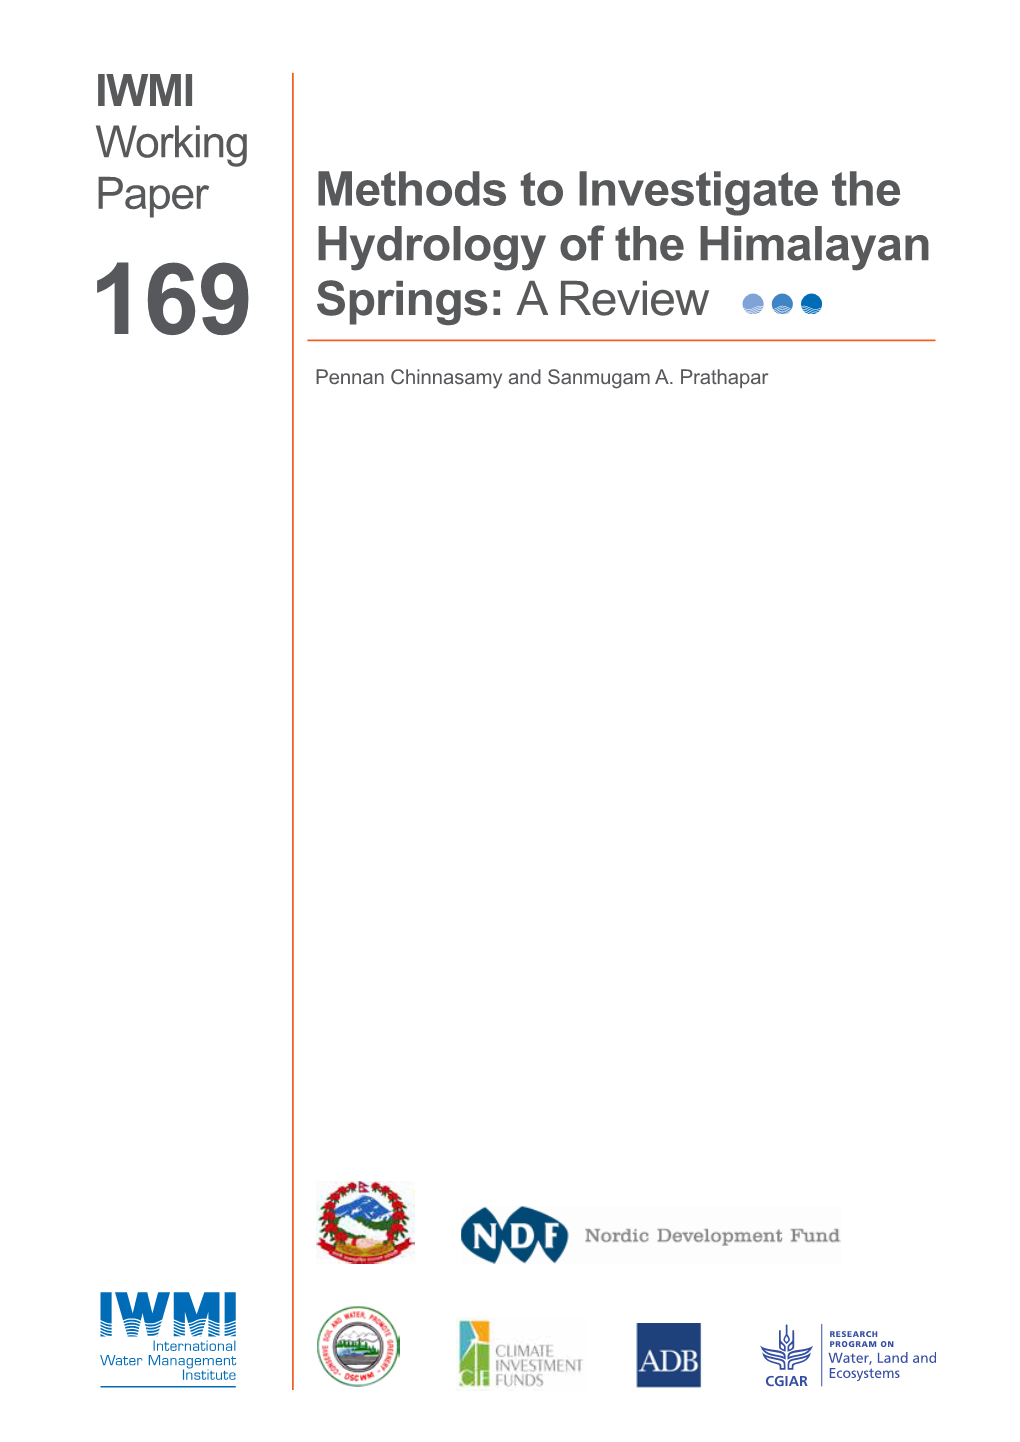 Methods to Investigate the Hydrology of the Himalayan Springs: a Review